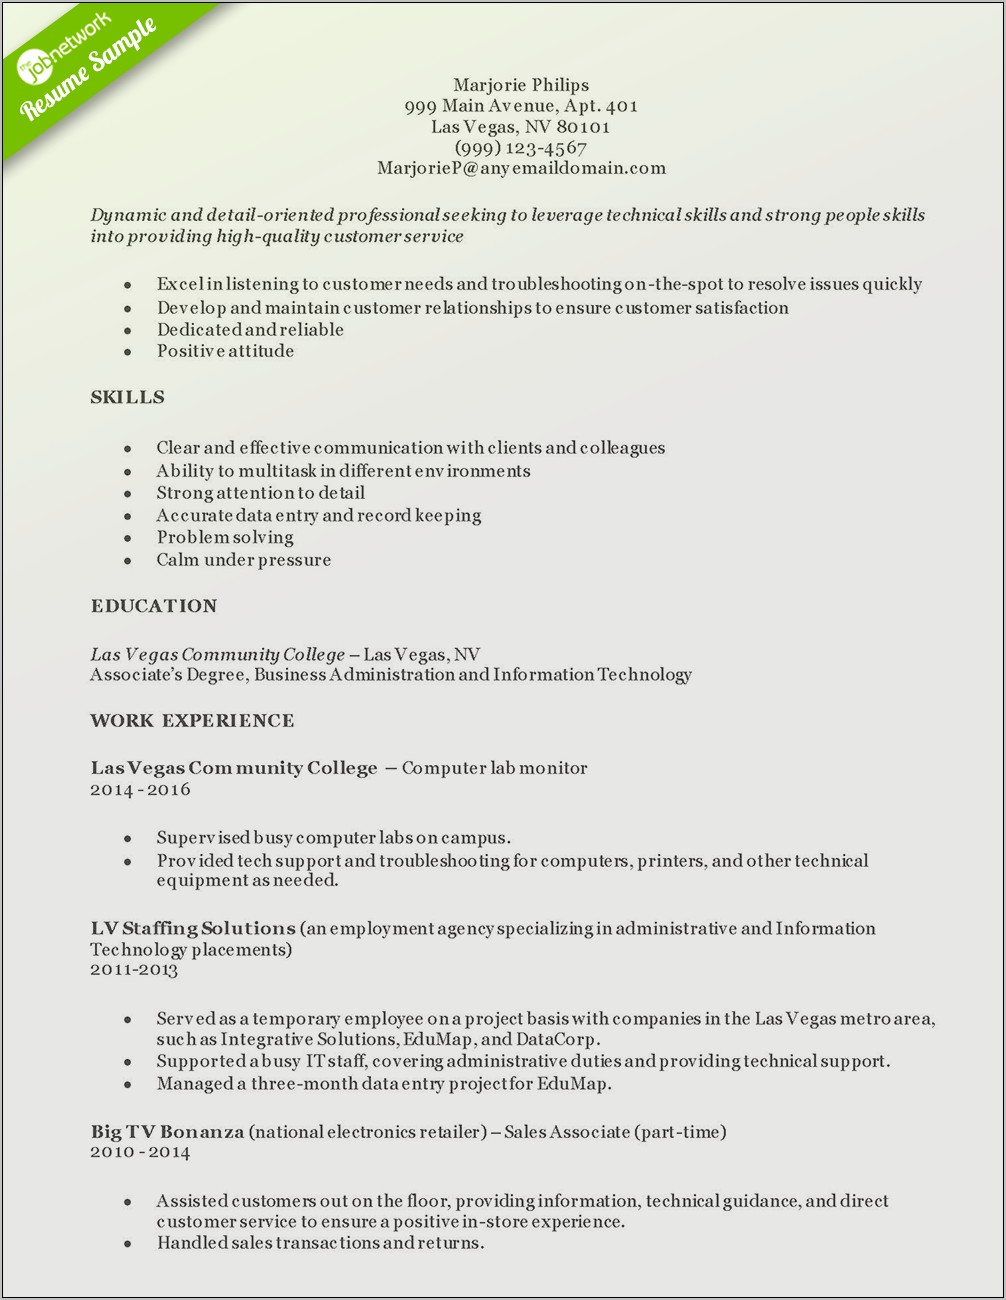 Sample Resumes For Entry Level Customer Service Positions